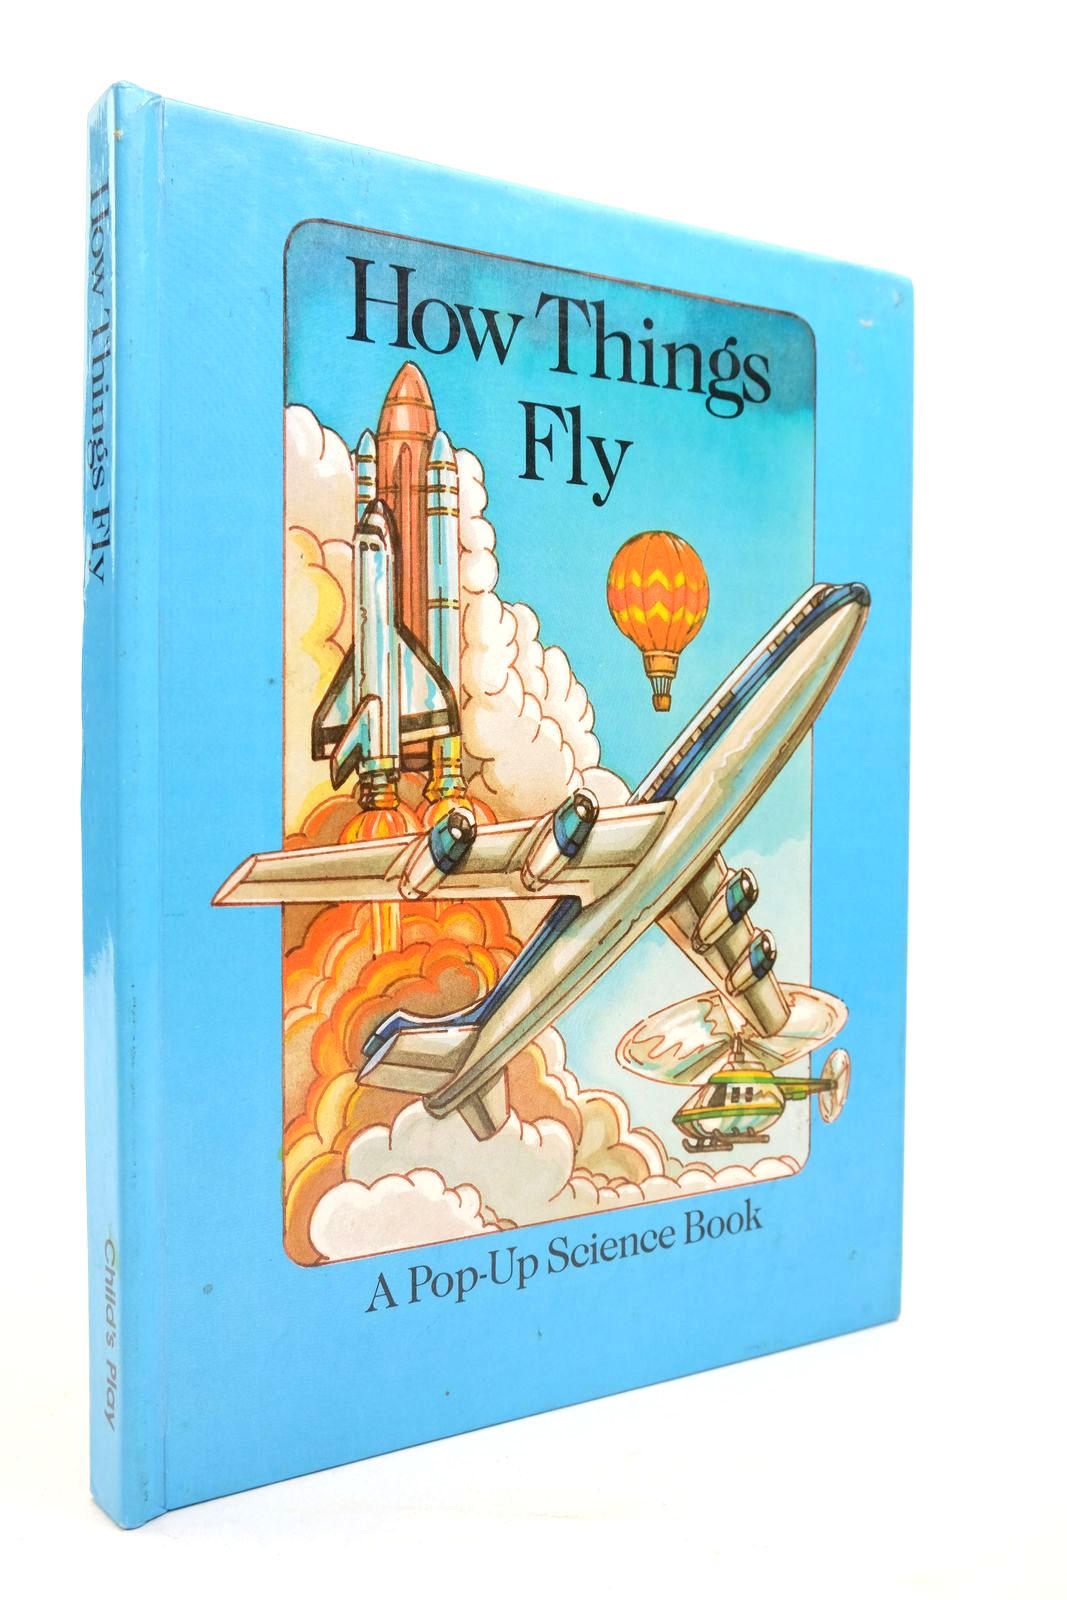 Photo of HOW THINGS FLY published by Child's Play (International) Ltd. (STOCK CODE: 2140842)  for sale by Stella & Rose's Books